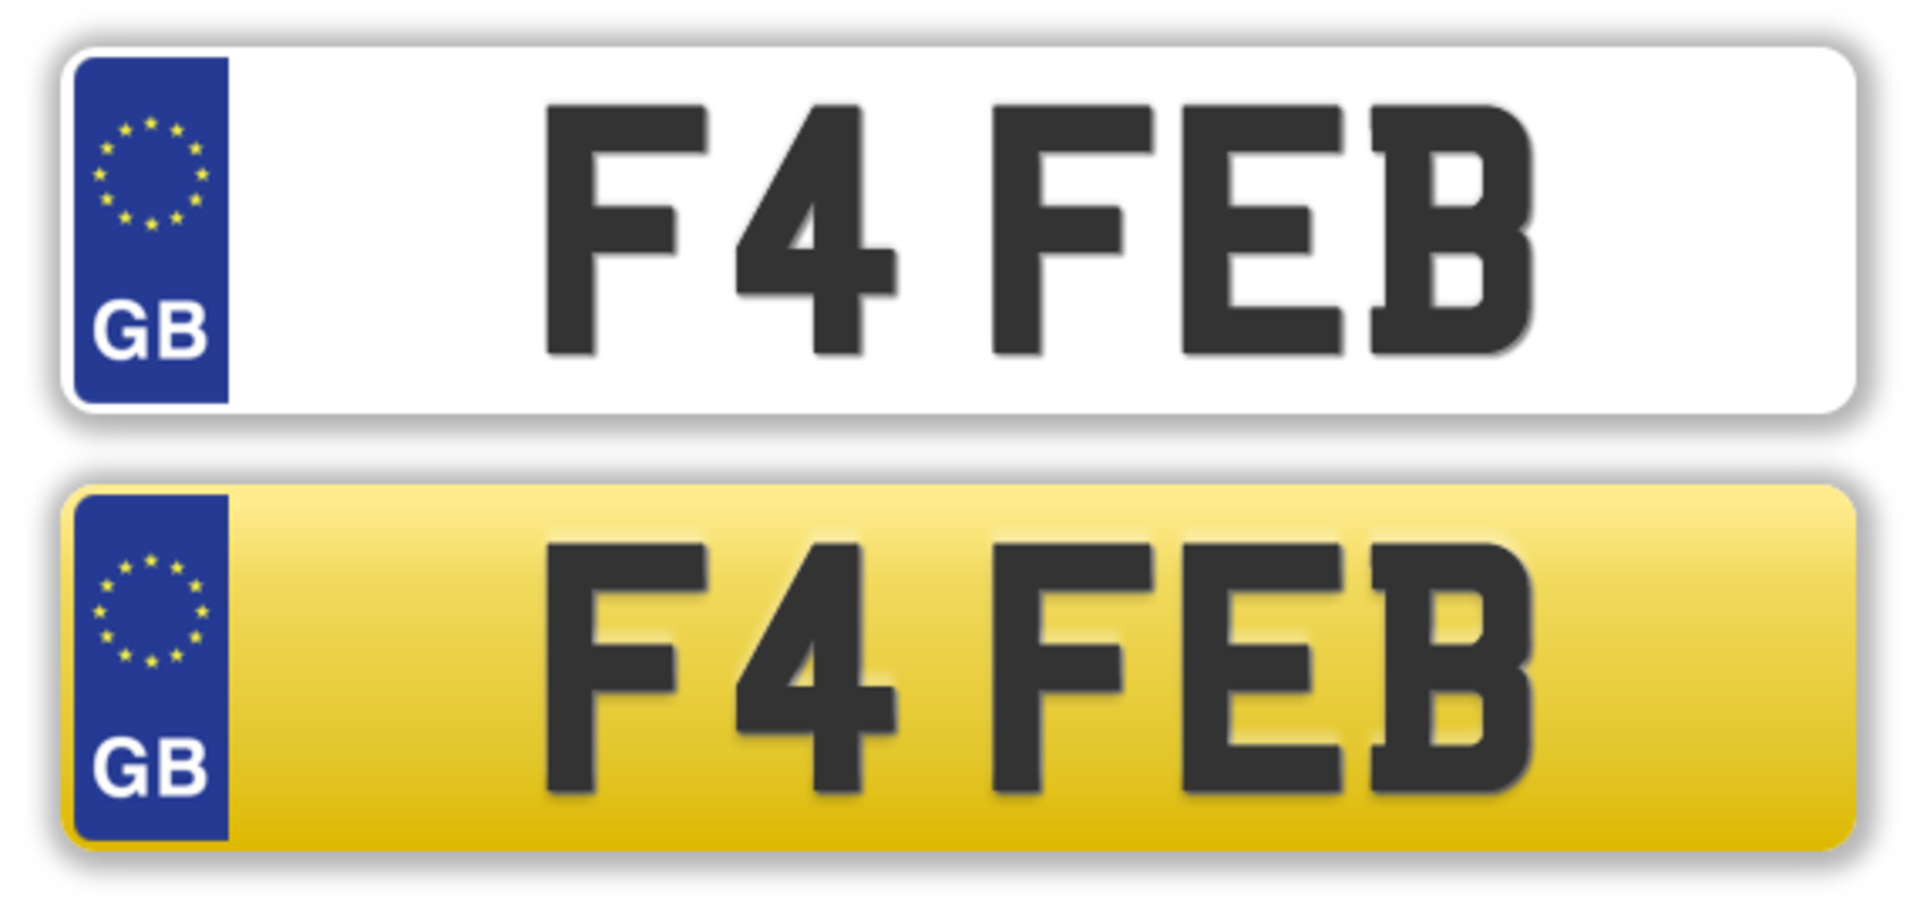 Cherished Plate - F4 FEB - No transfer fees. All registrations on retention and ready to transfer.